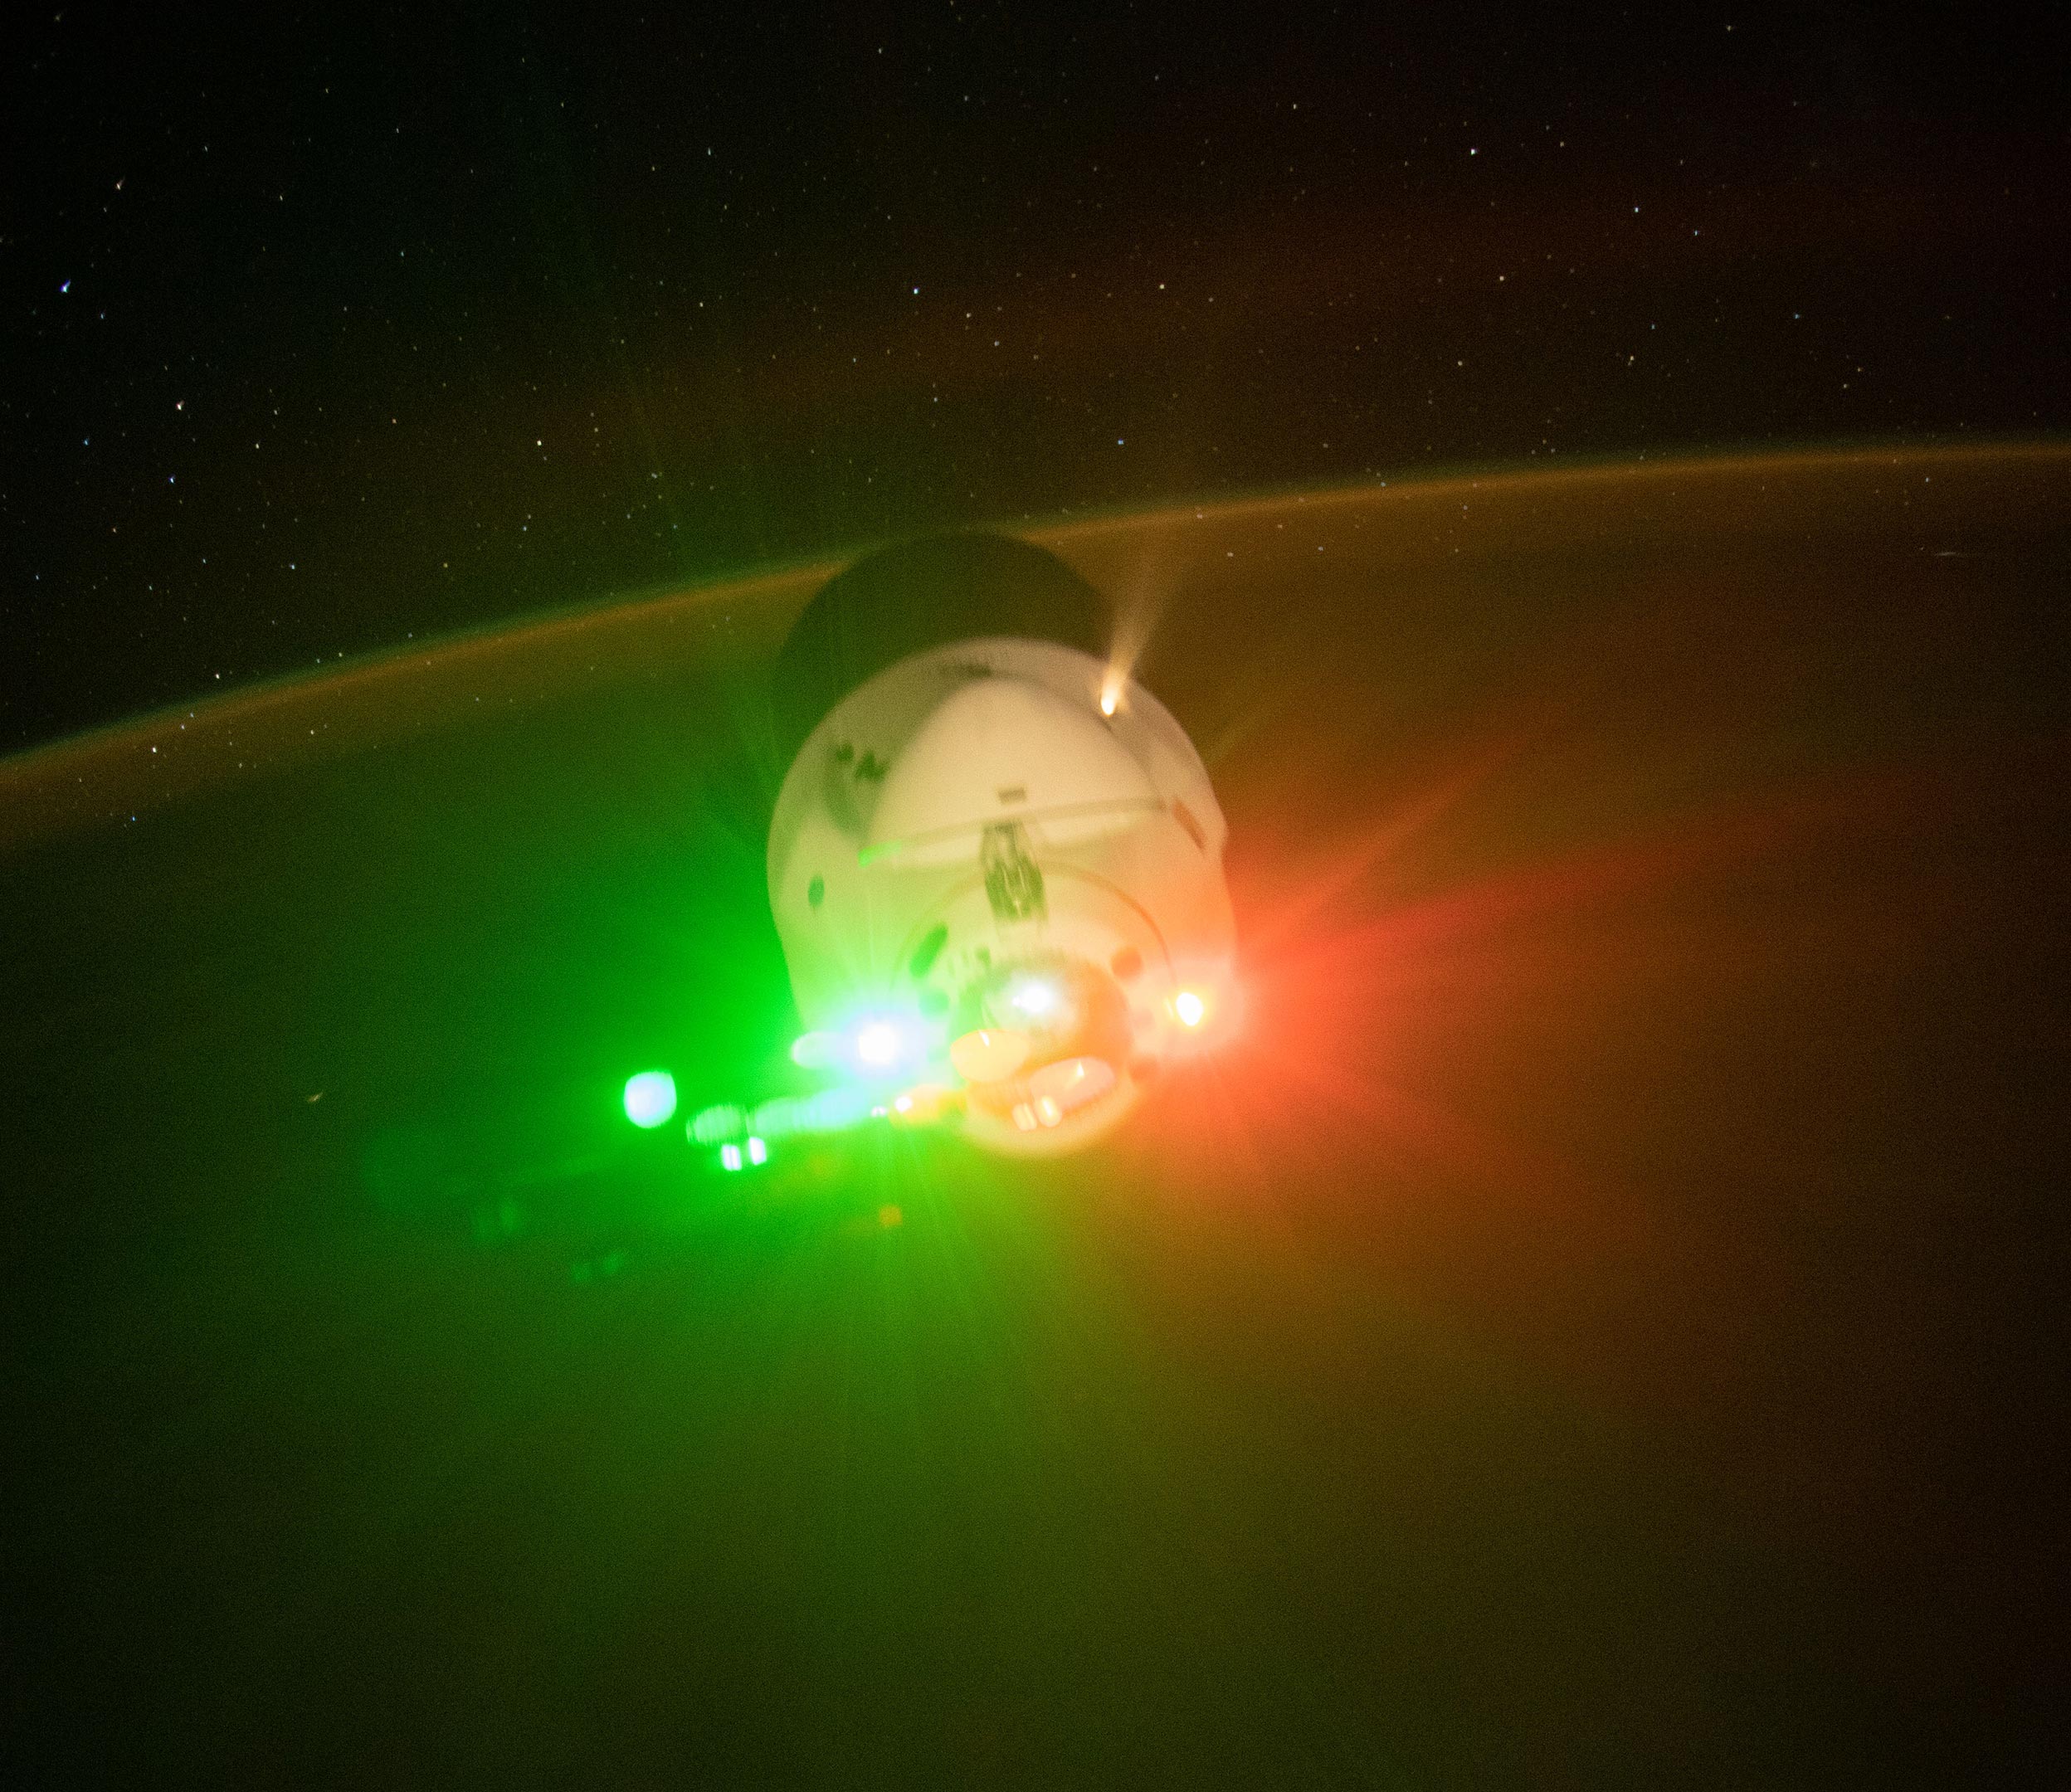 SpaceX Dragon Returned to Earth Today – Space Station Crew Studies Agriculture, Physics